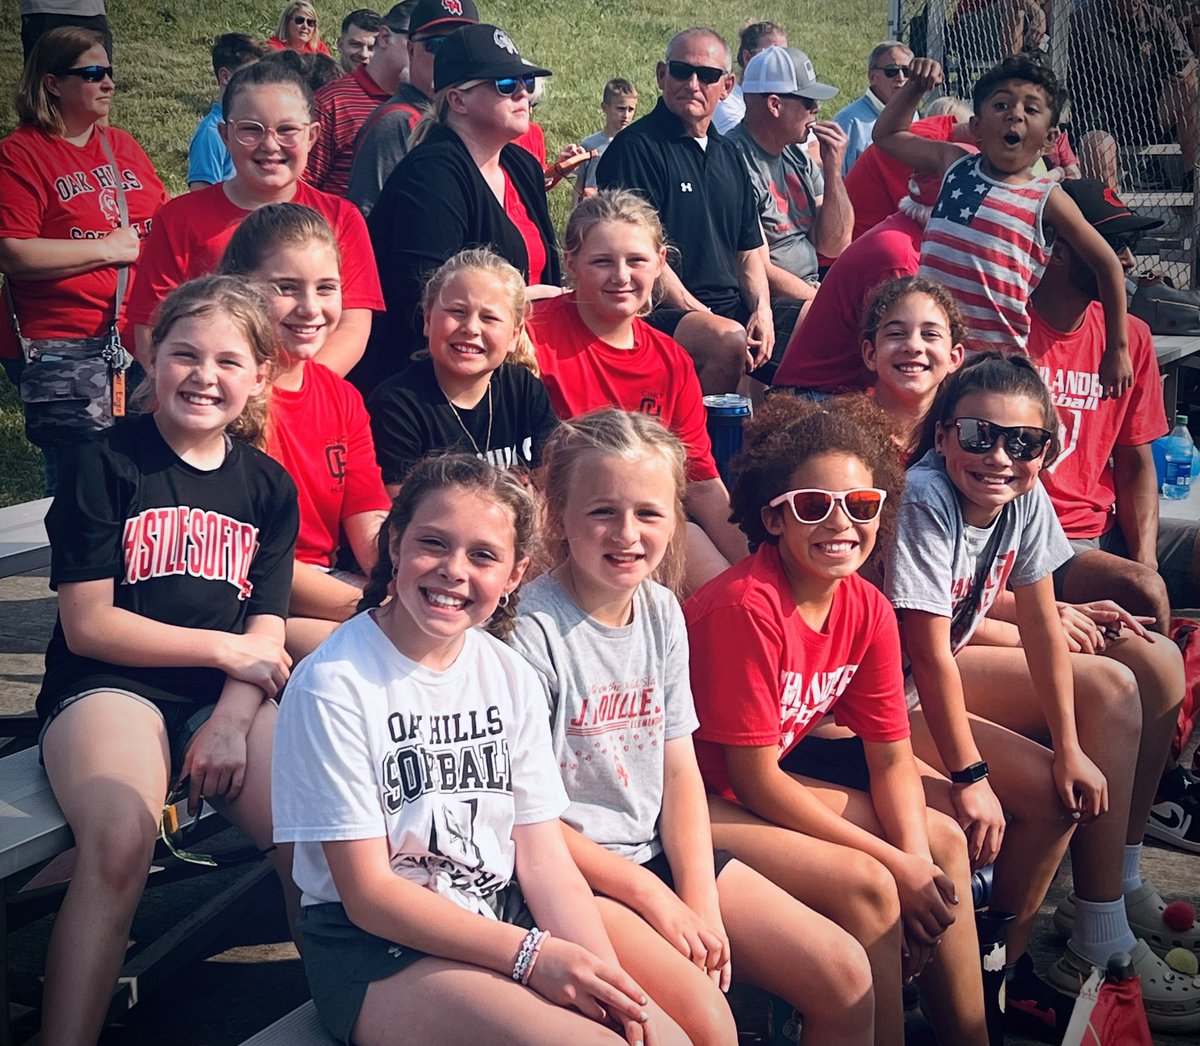 THANK YOU for ALL the support this season. There is no community like the one we’ve been surrounded with and my squad is blessed with one of the best villages around..Bc as you know, “it takes a village!” ❤️🥎🖤 #OHSBfamily